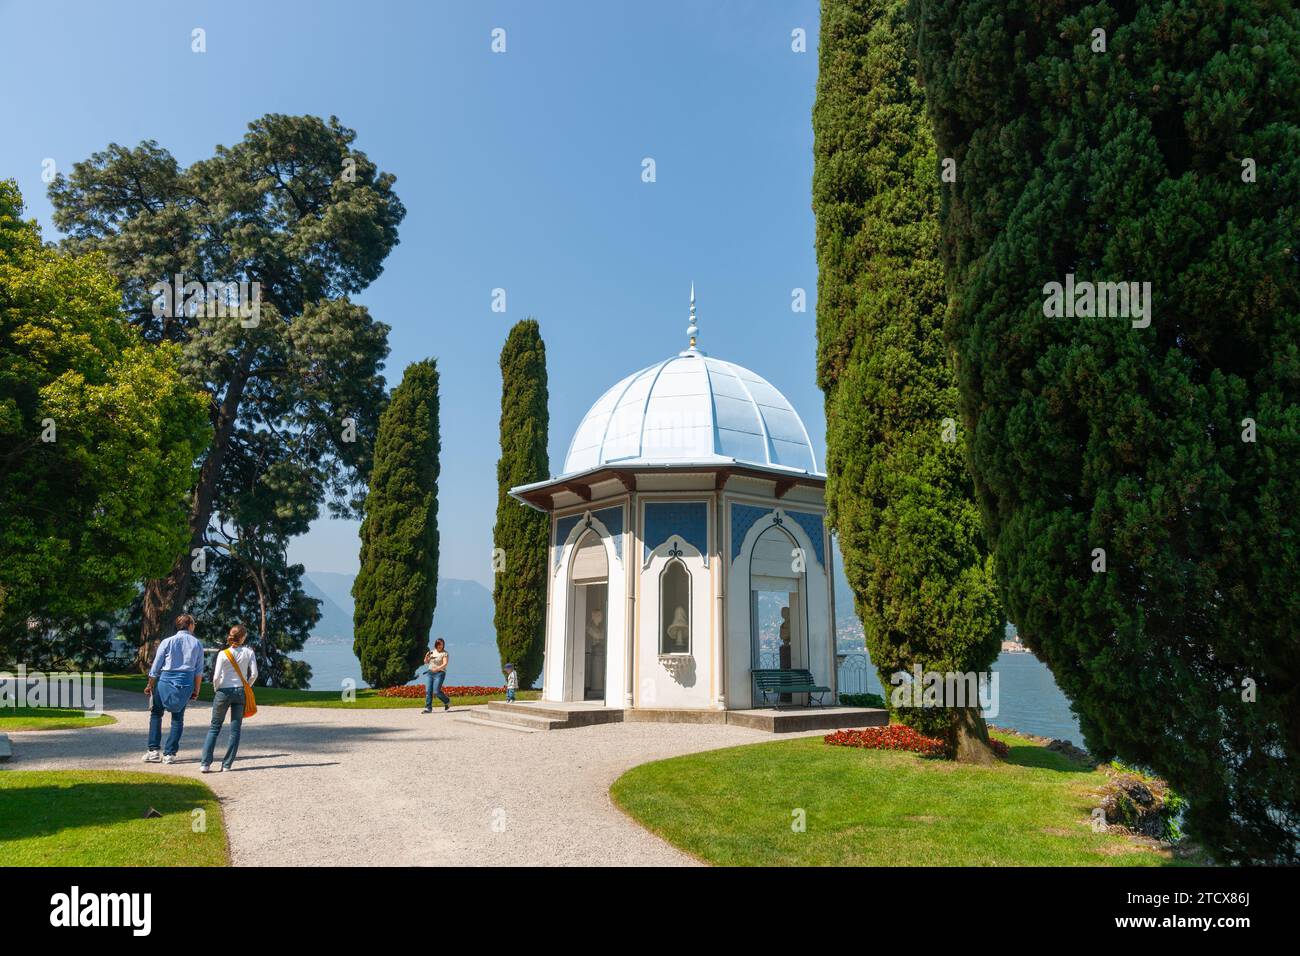 Bellagio Italy - May 8 2011; path leads to Moorish style kiosk surrounded by cypress trees in garden in Bellagio Stock Photo